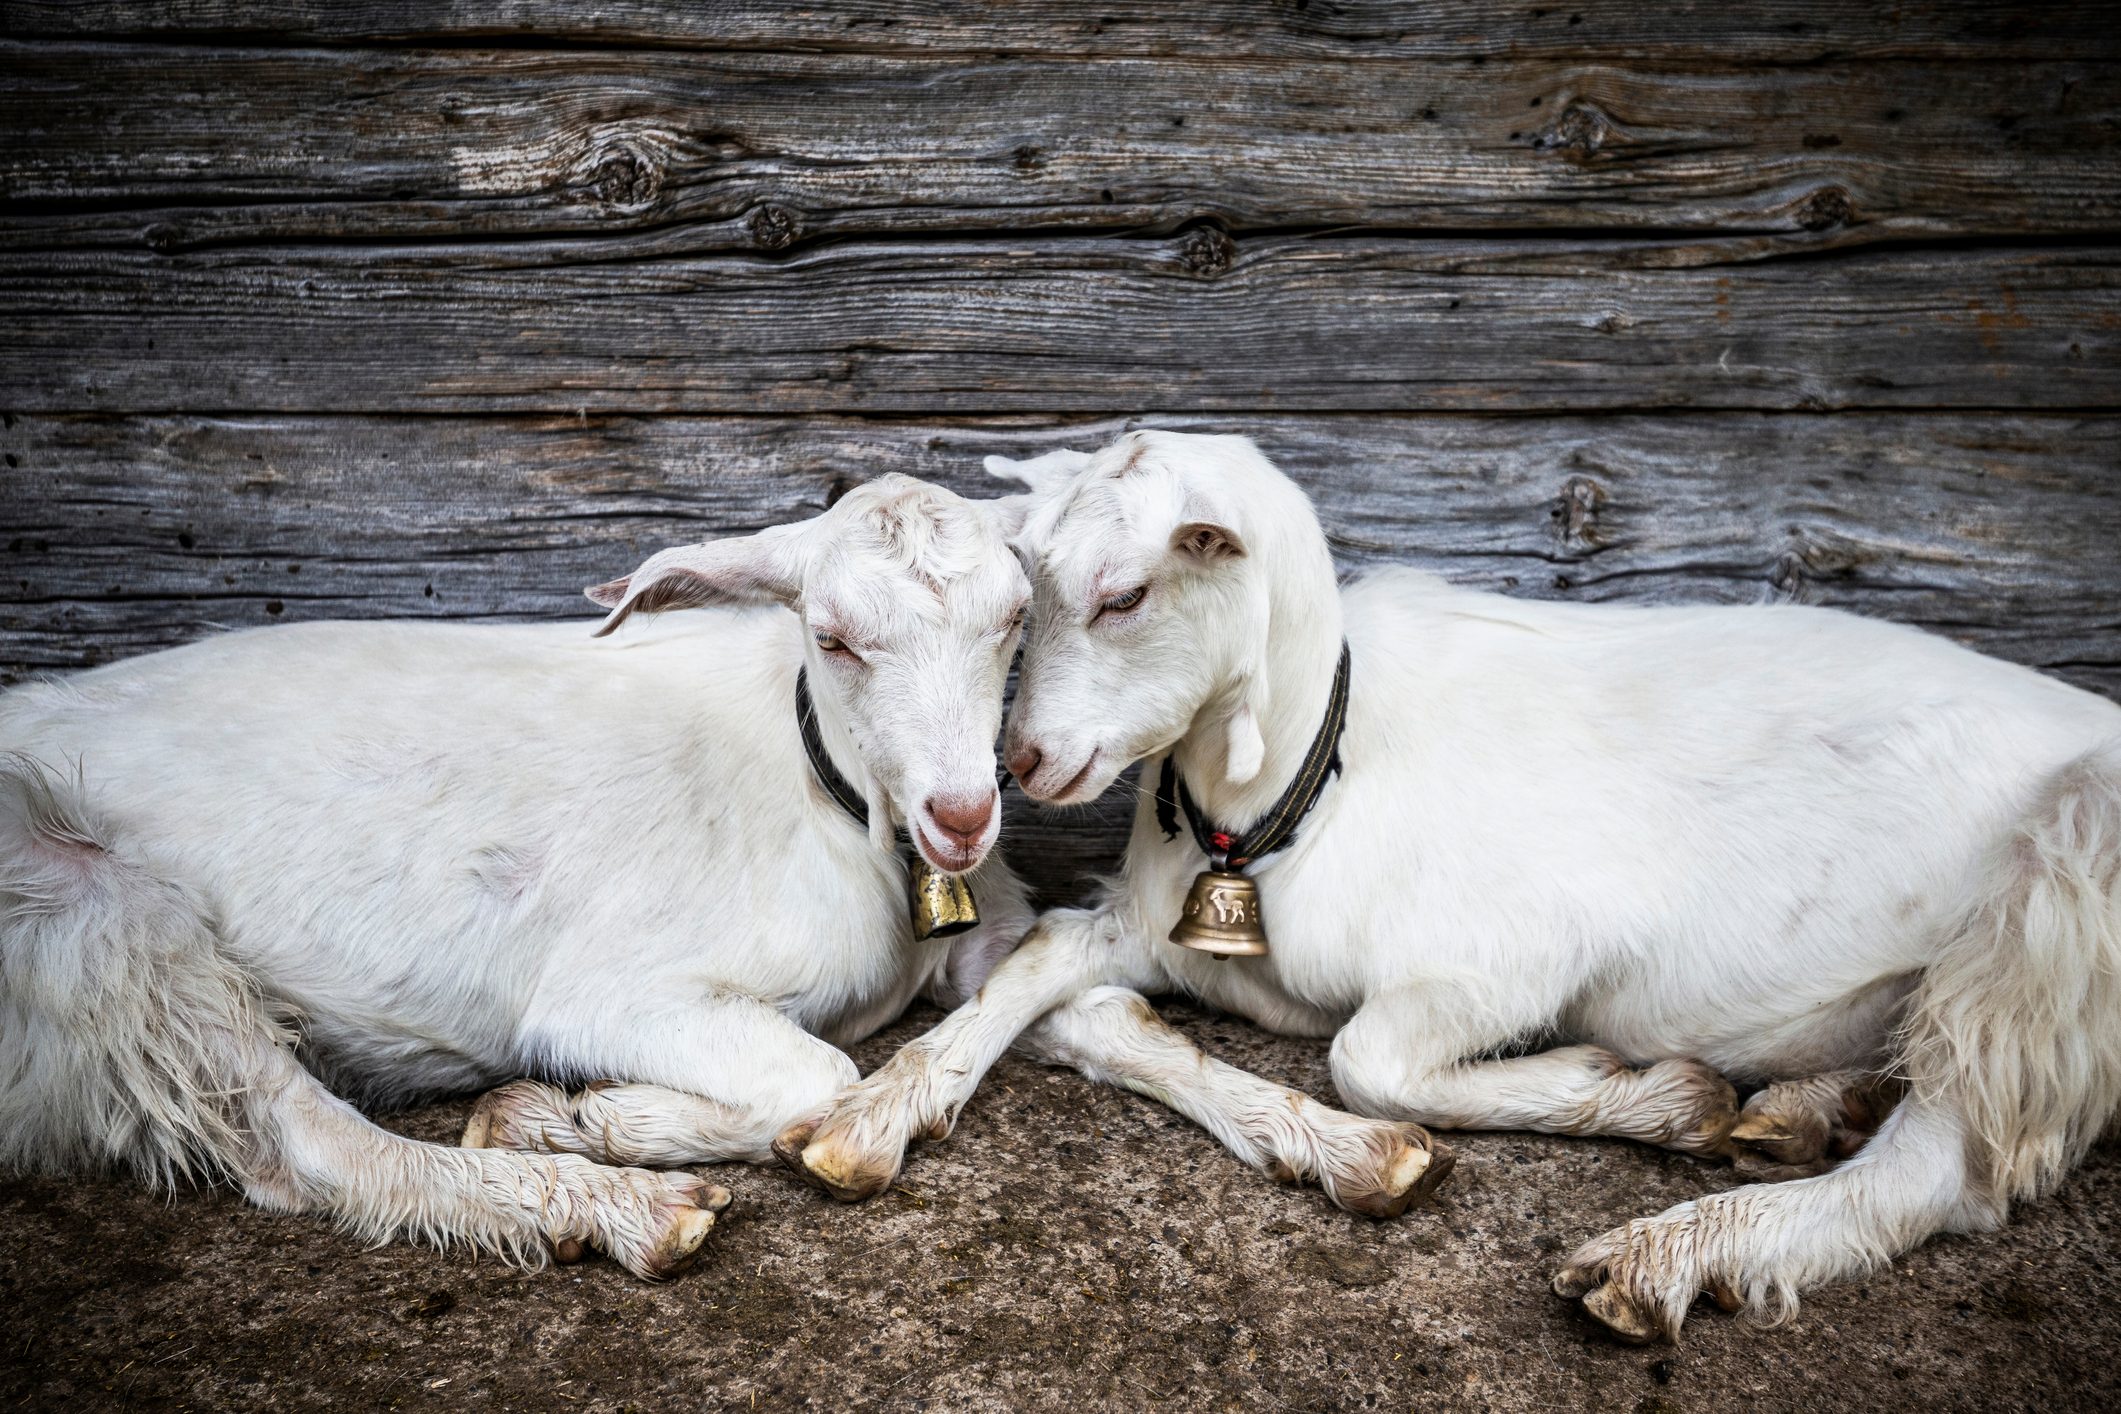 Exchange of tenderness and love between two white goats.